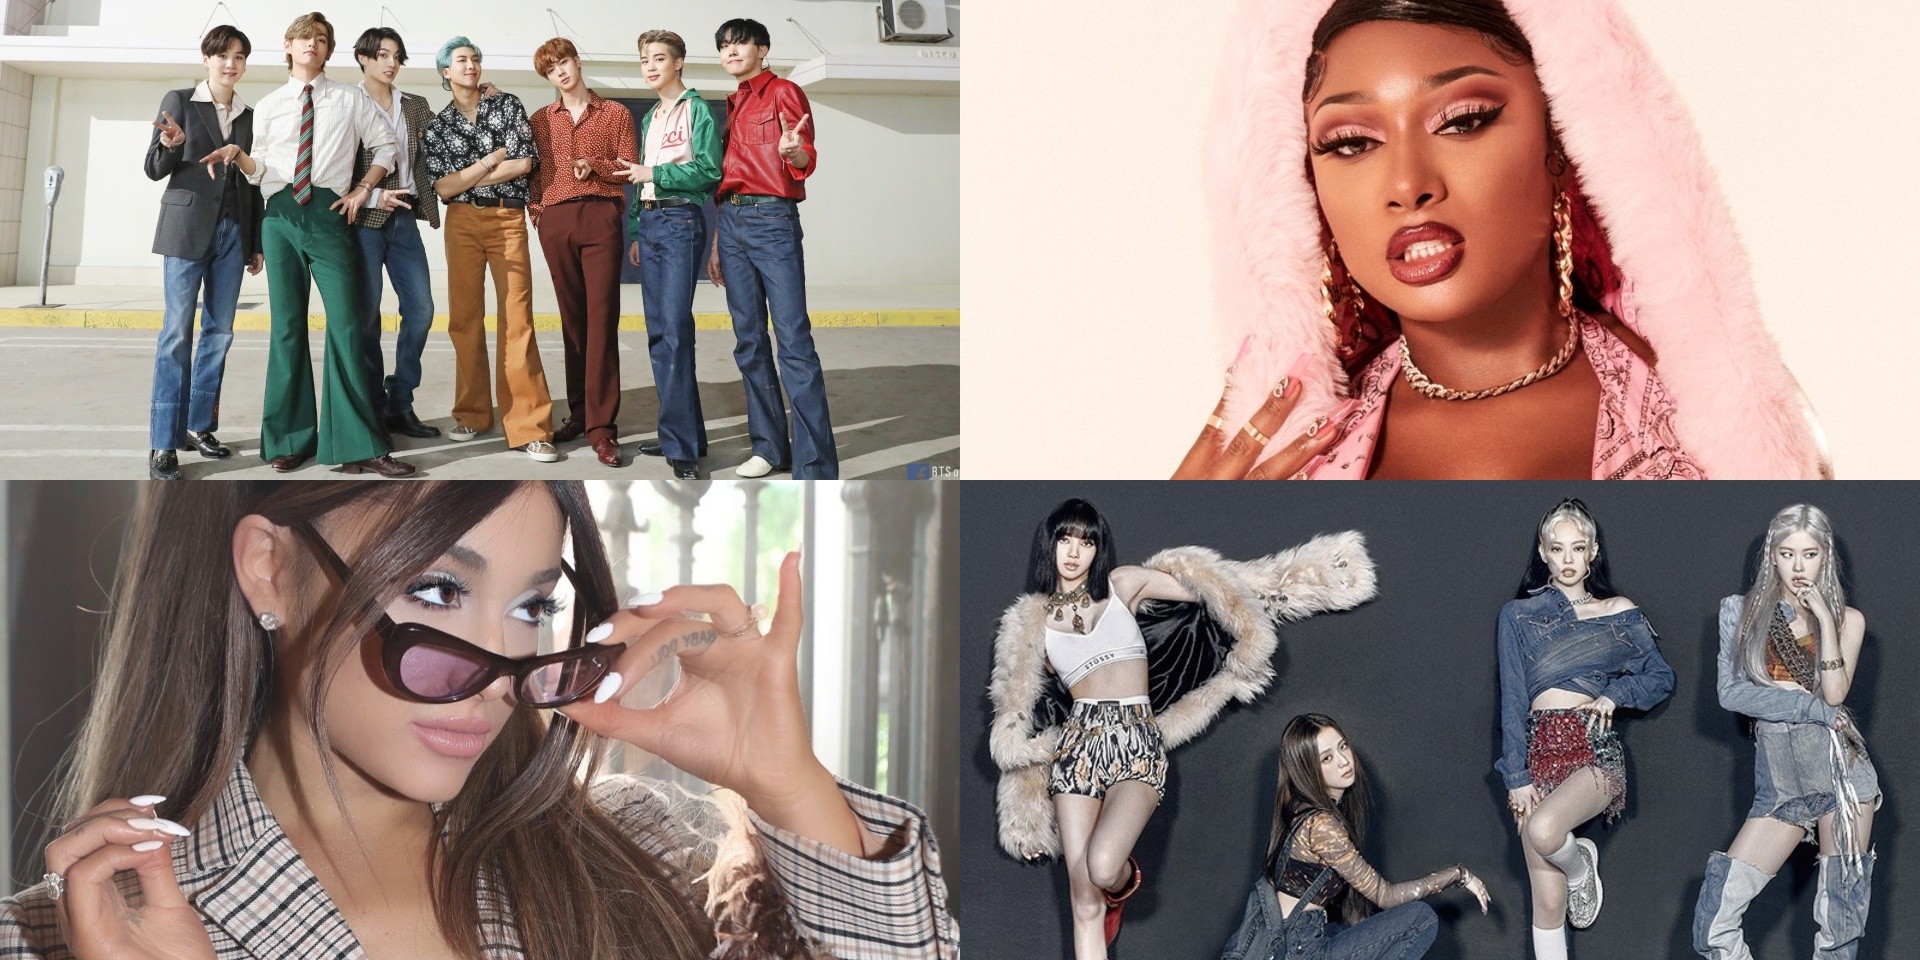 BTS, BLACKPINK, Megan Thee Stallion, Ariana Grande, and more nominated for the 2020 E! People’s Choice Awards